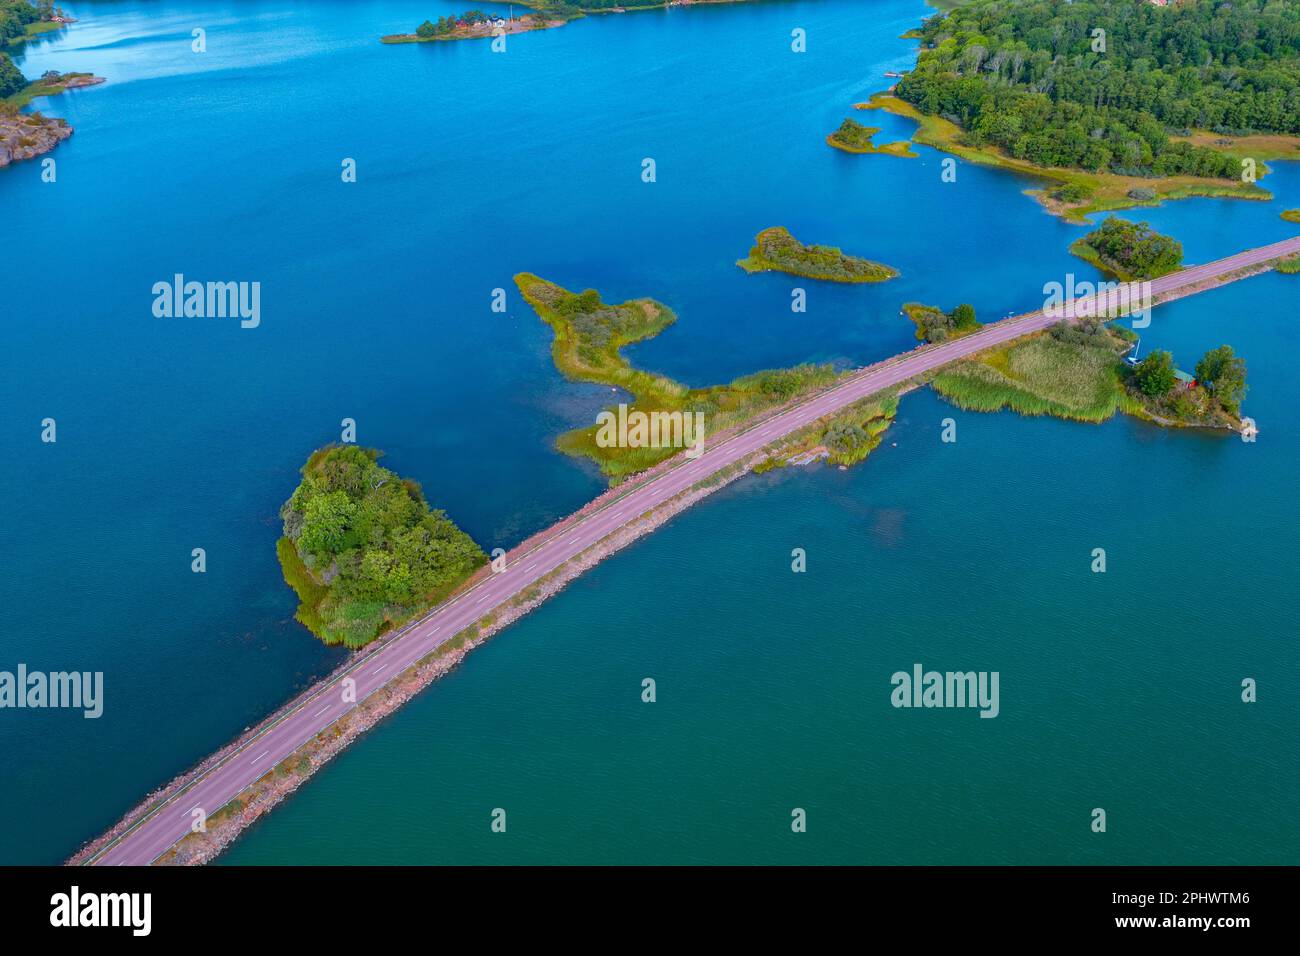 Road connecting remote islands at Aland archipelago in Finland. Stock Photo